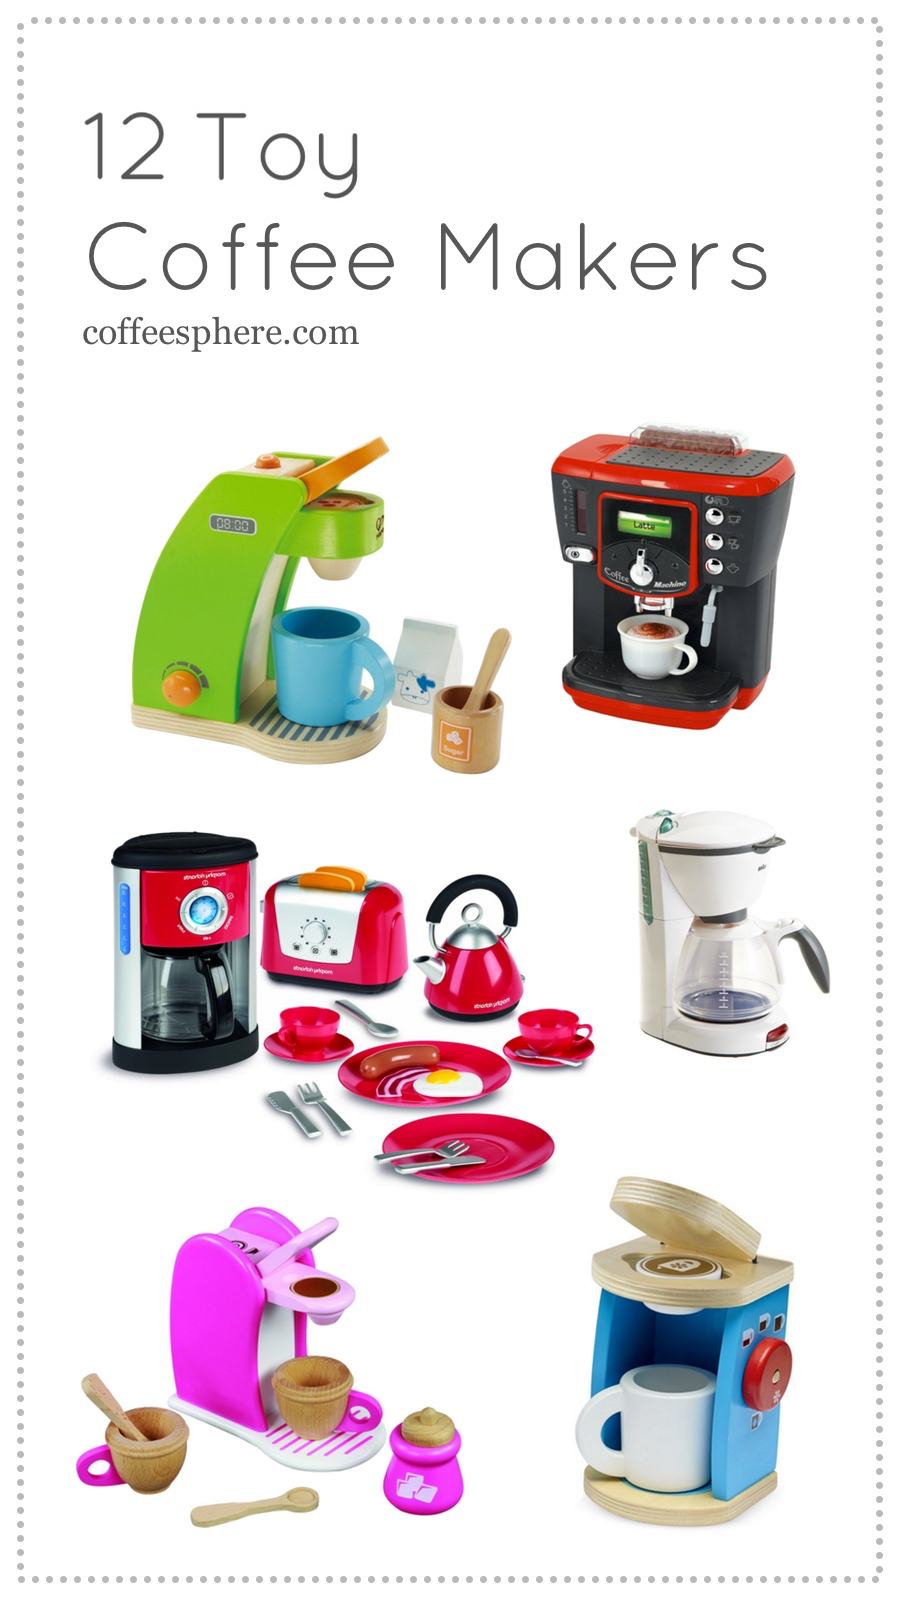 Dorjee Kids Coffee Maker Playset with Grinder, Play to Learn Coffee Making  Routine, Stimulates Imaginative Pretend Play and Life Skills, Gifts for